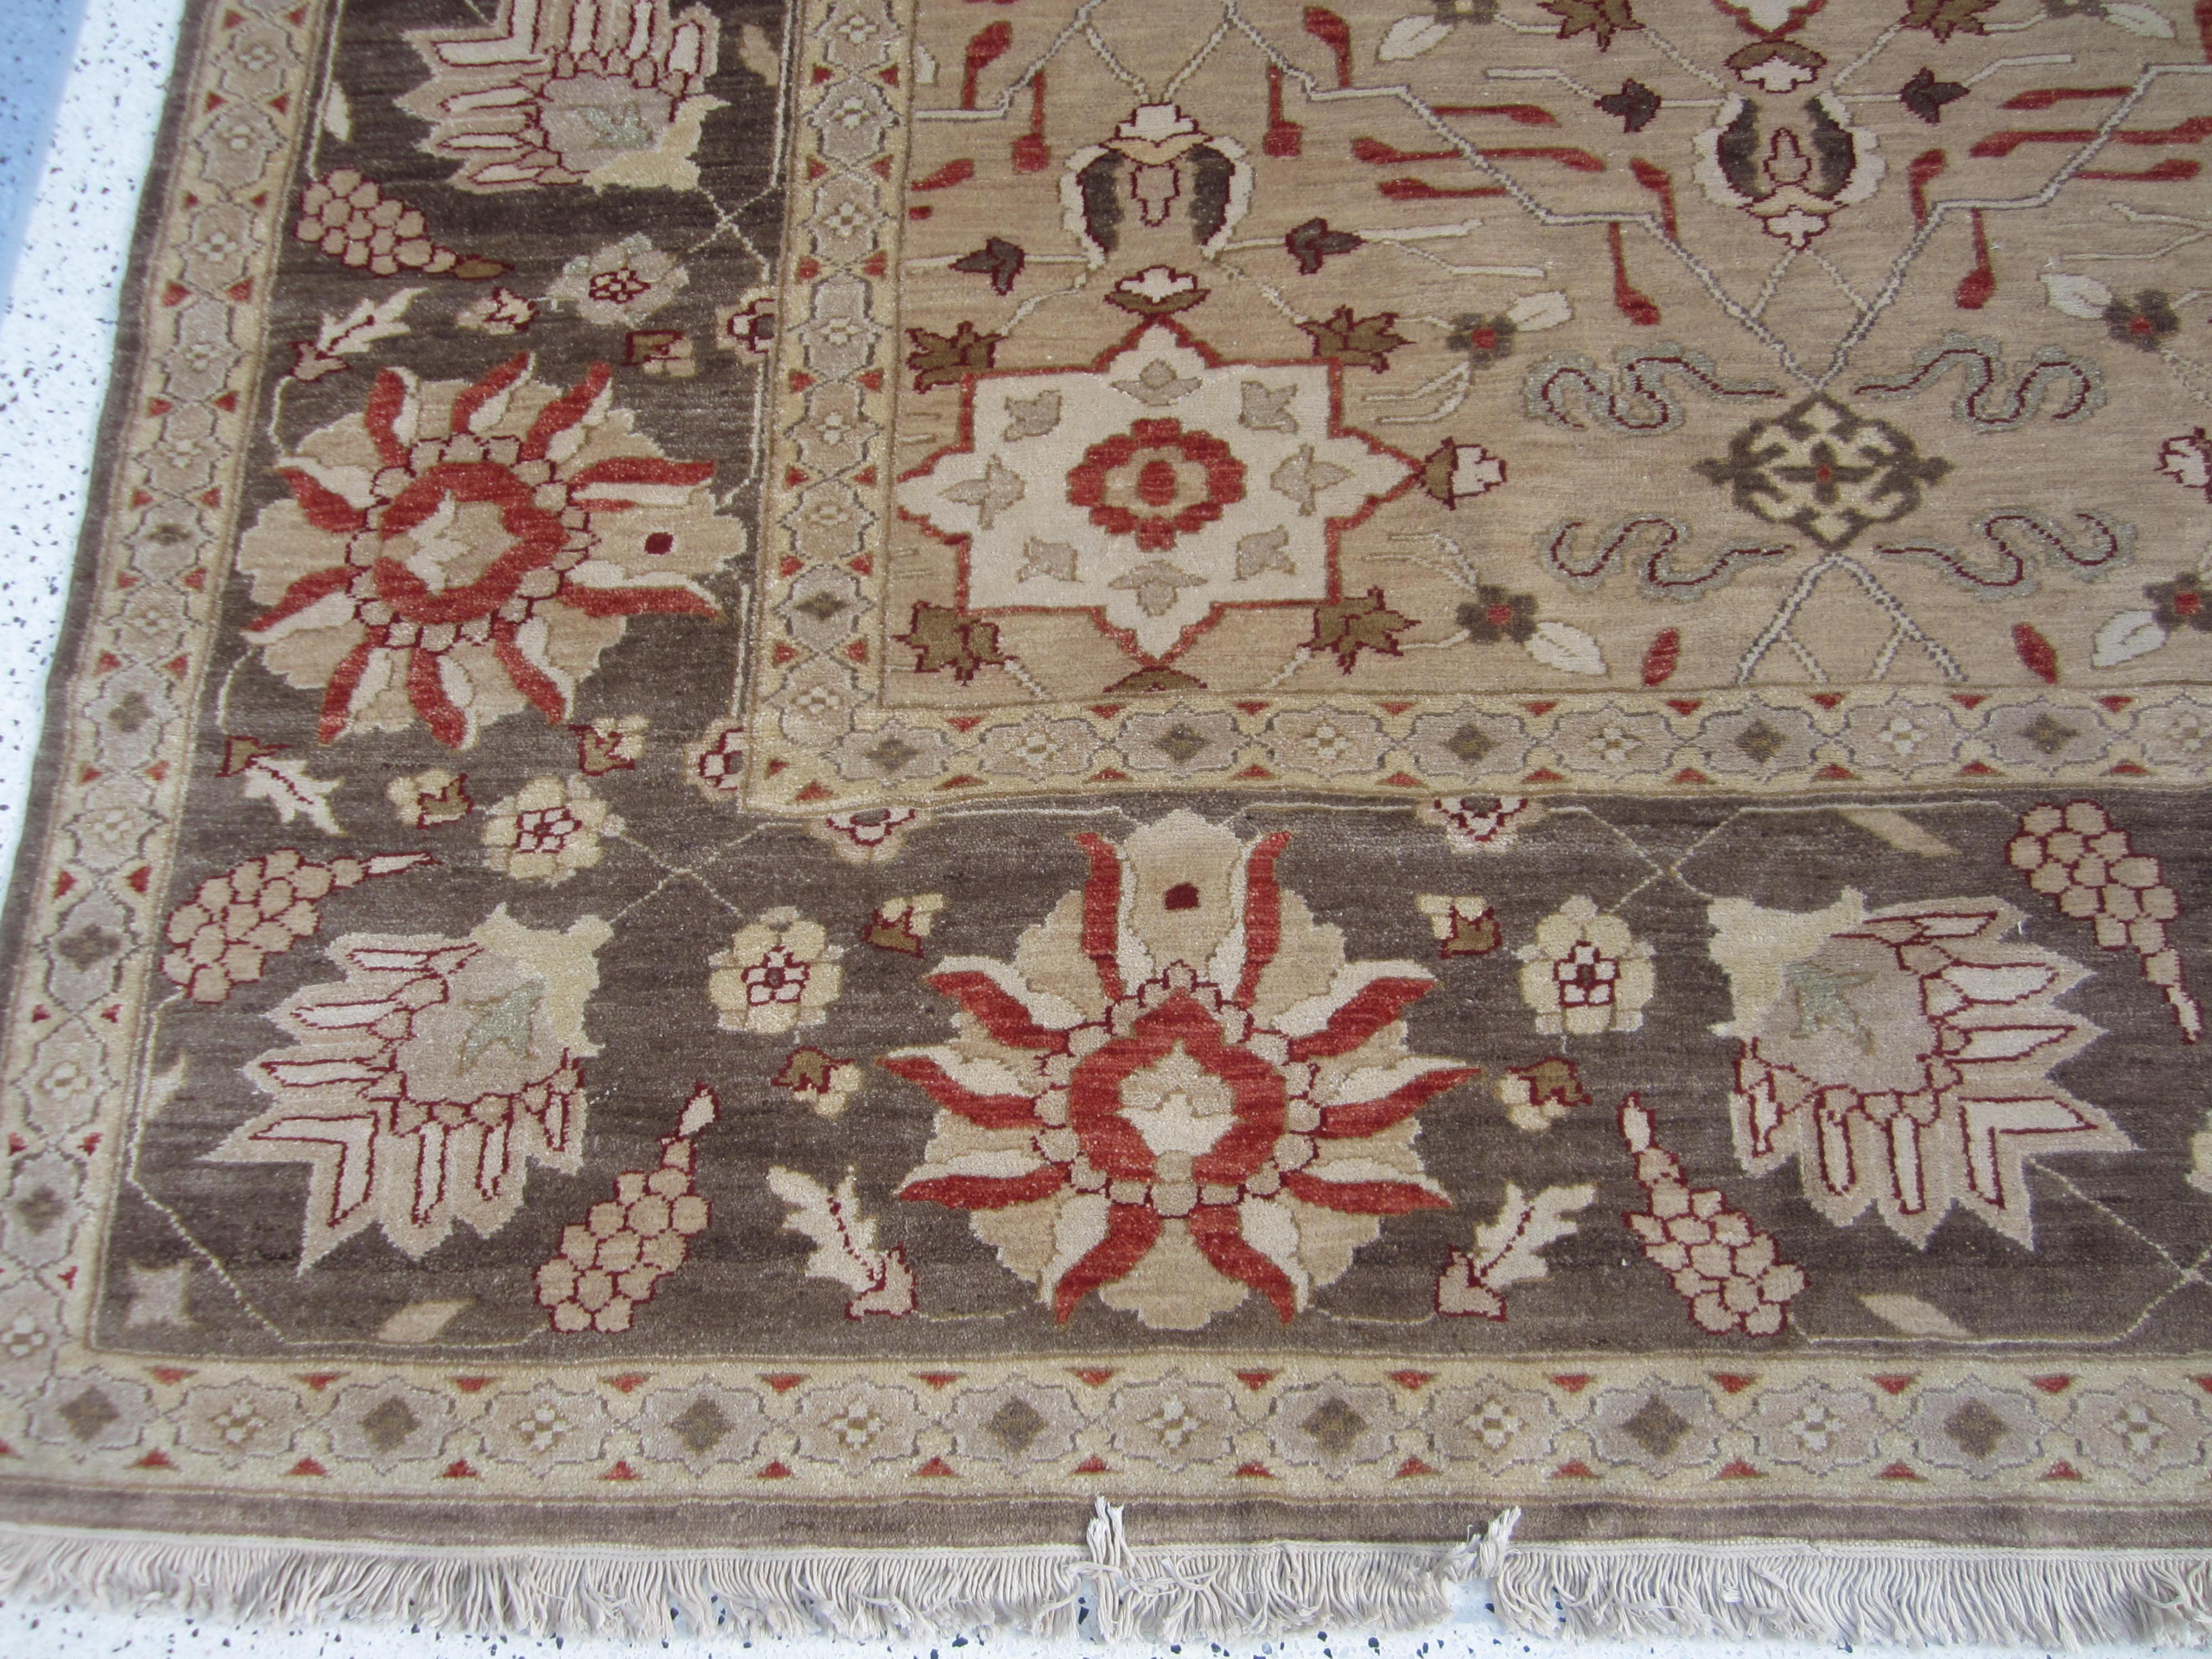 This Egyptian rug features a reds floral design  allowing you to switch up your decor. Add a touch of style to any room while also having the option to change things up to suit your mood. Beautiful and versatile, this rug is a must-have for any home.